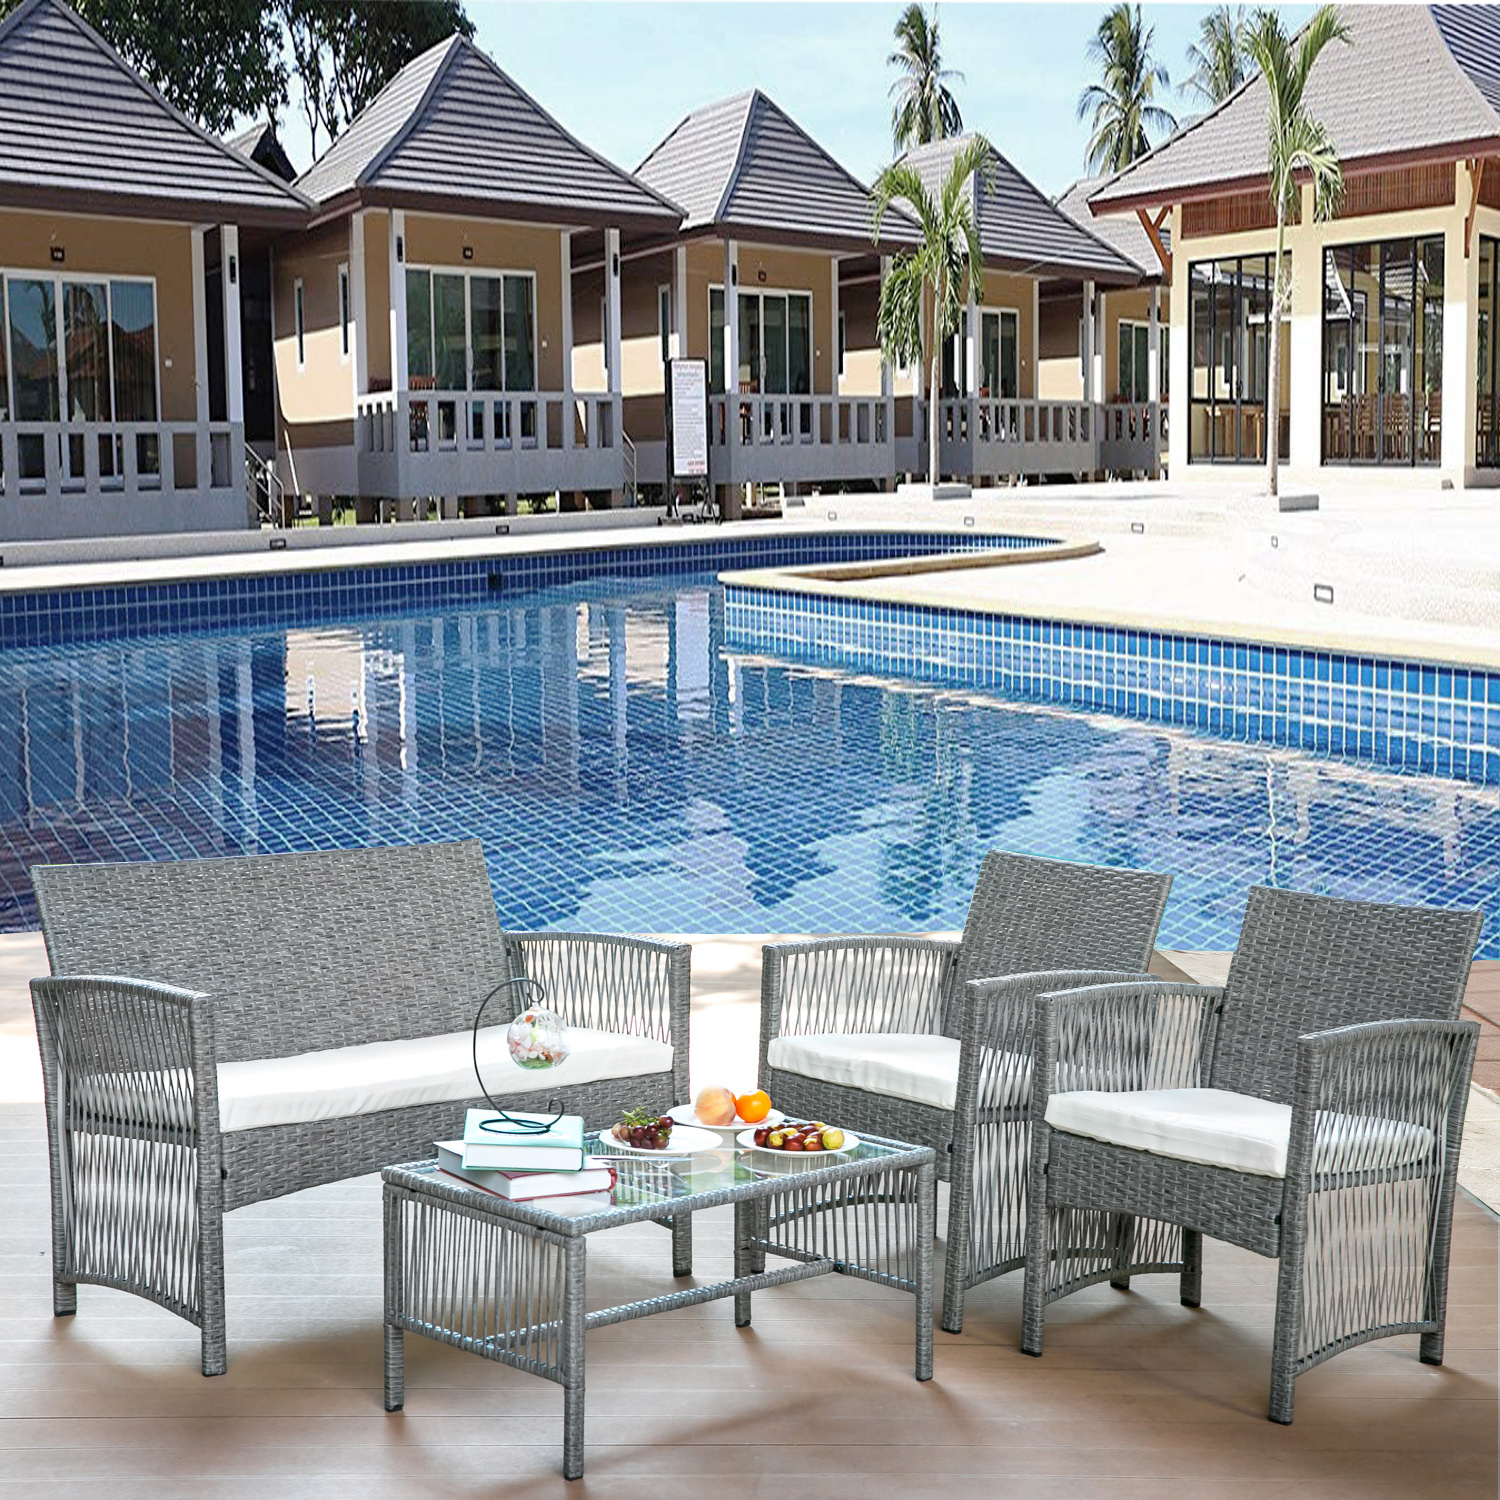 Rattan Patio Furniture Sets Clearance, 4 Piece Outdoor Conversation Sets, Wicker Bar Set with 2 Arm Chairs,1 Loveseat & Coffee Table, Patio Dining Sets for Backyard Porch Poolside Garden, Gray, W7782 - image 3 of 11